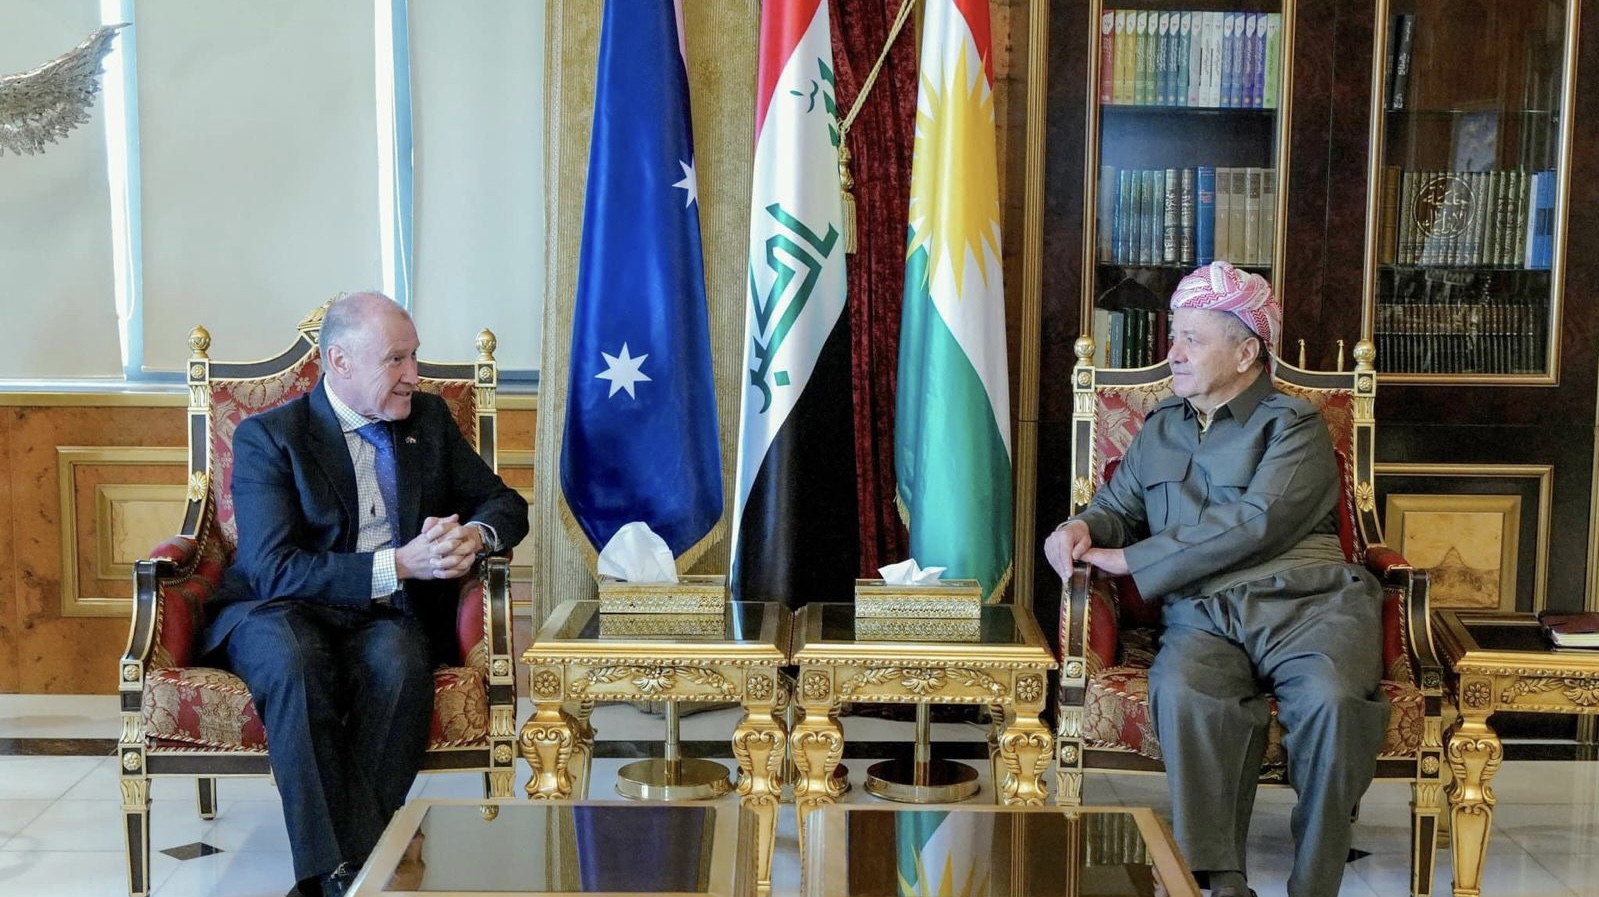 Masoud Barzani Canceling the quota seats for the minorities impacts the partnership and coexistence